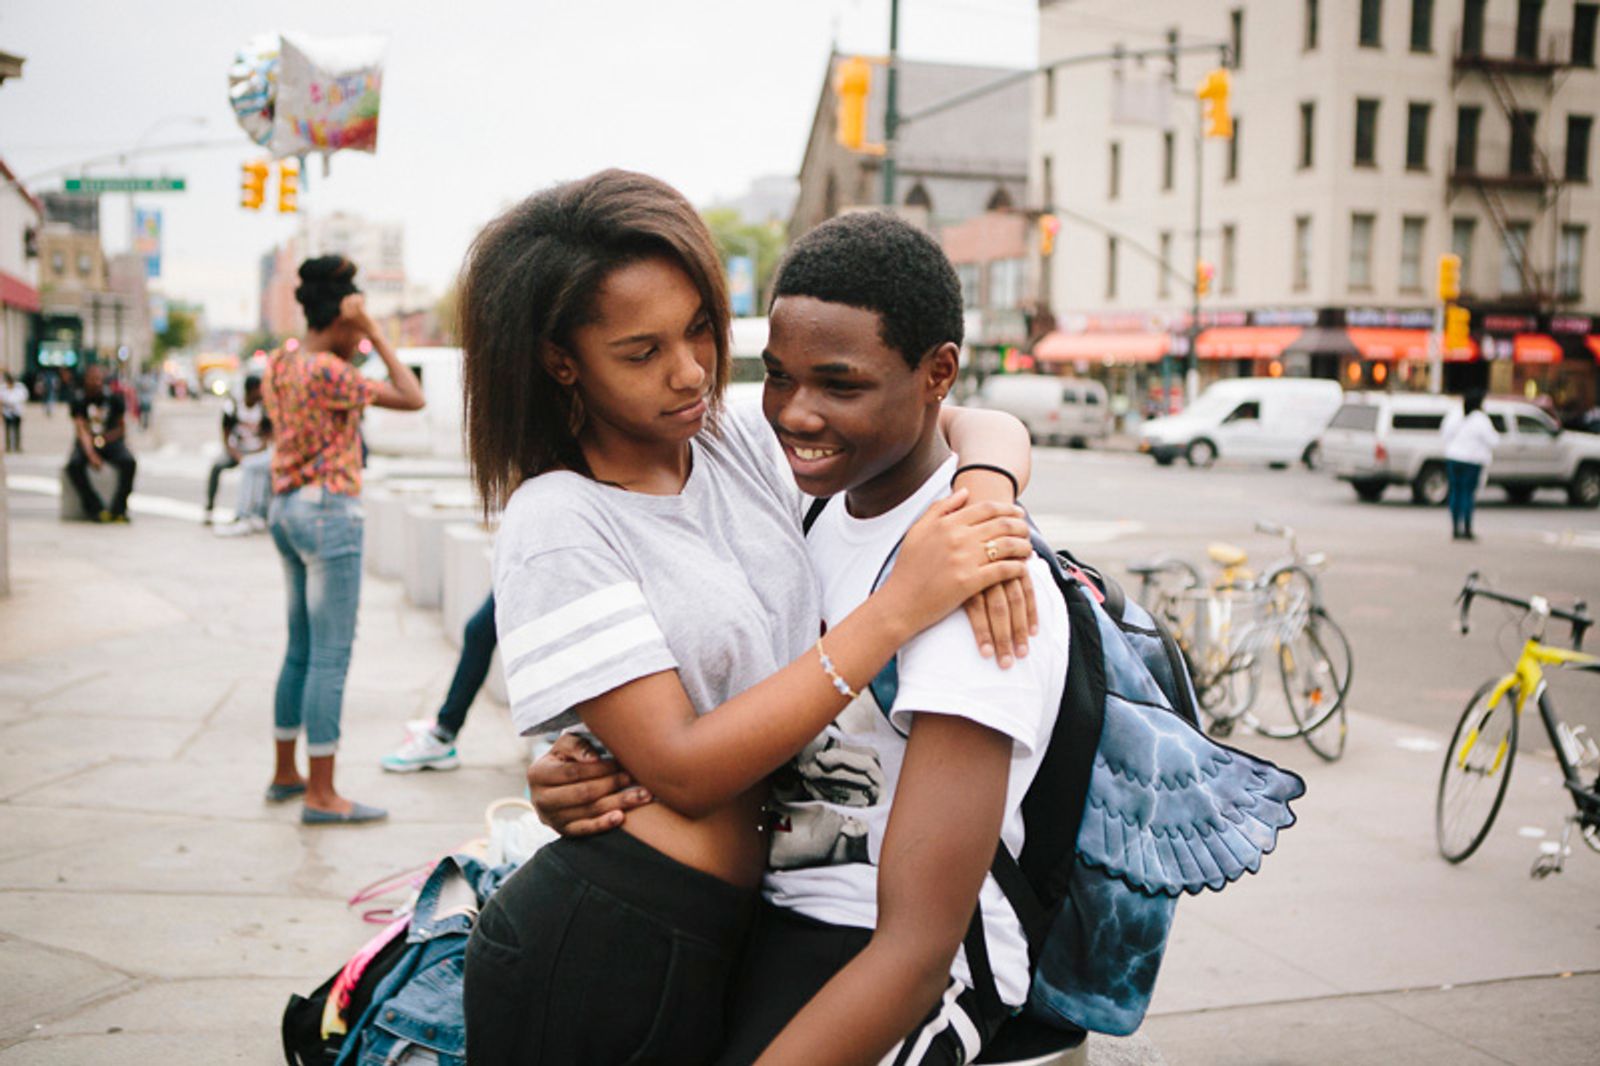 © Cassandra Giraldo - Raquelle and Alonzo hang out near Barclay's Center in Brooklyn, New York after school on September 29, 2014.